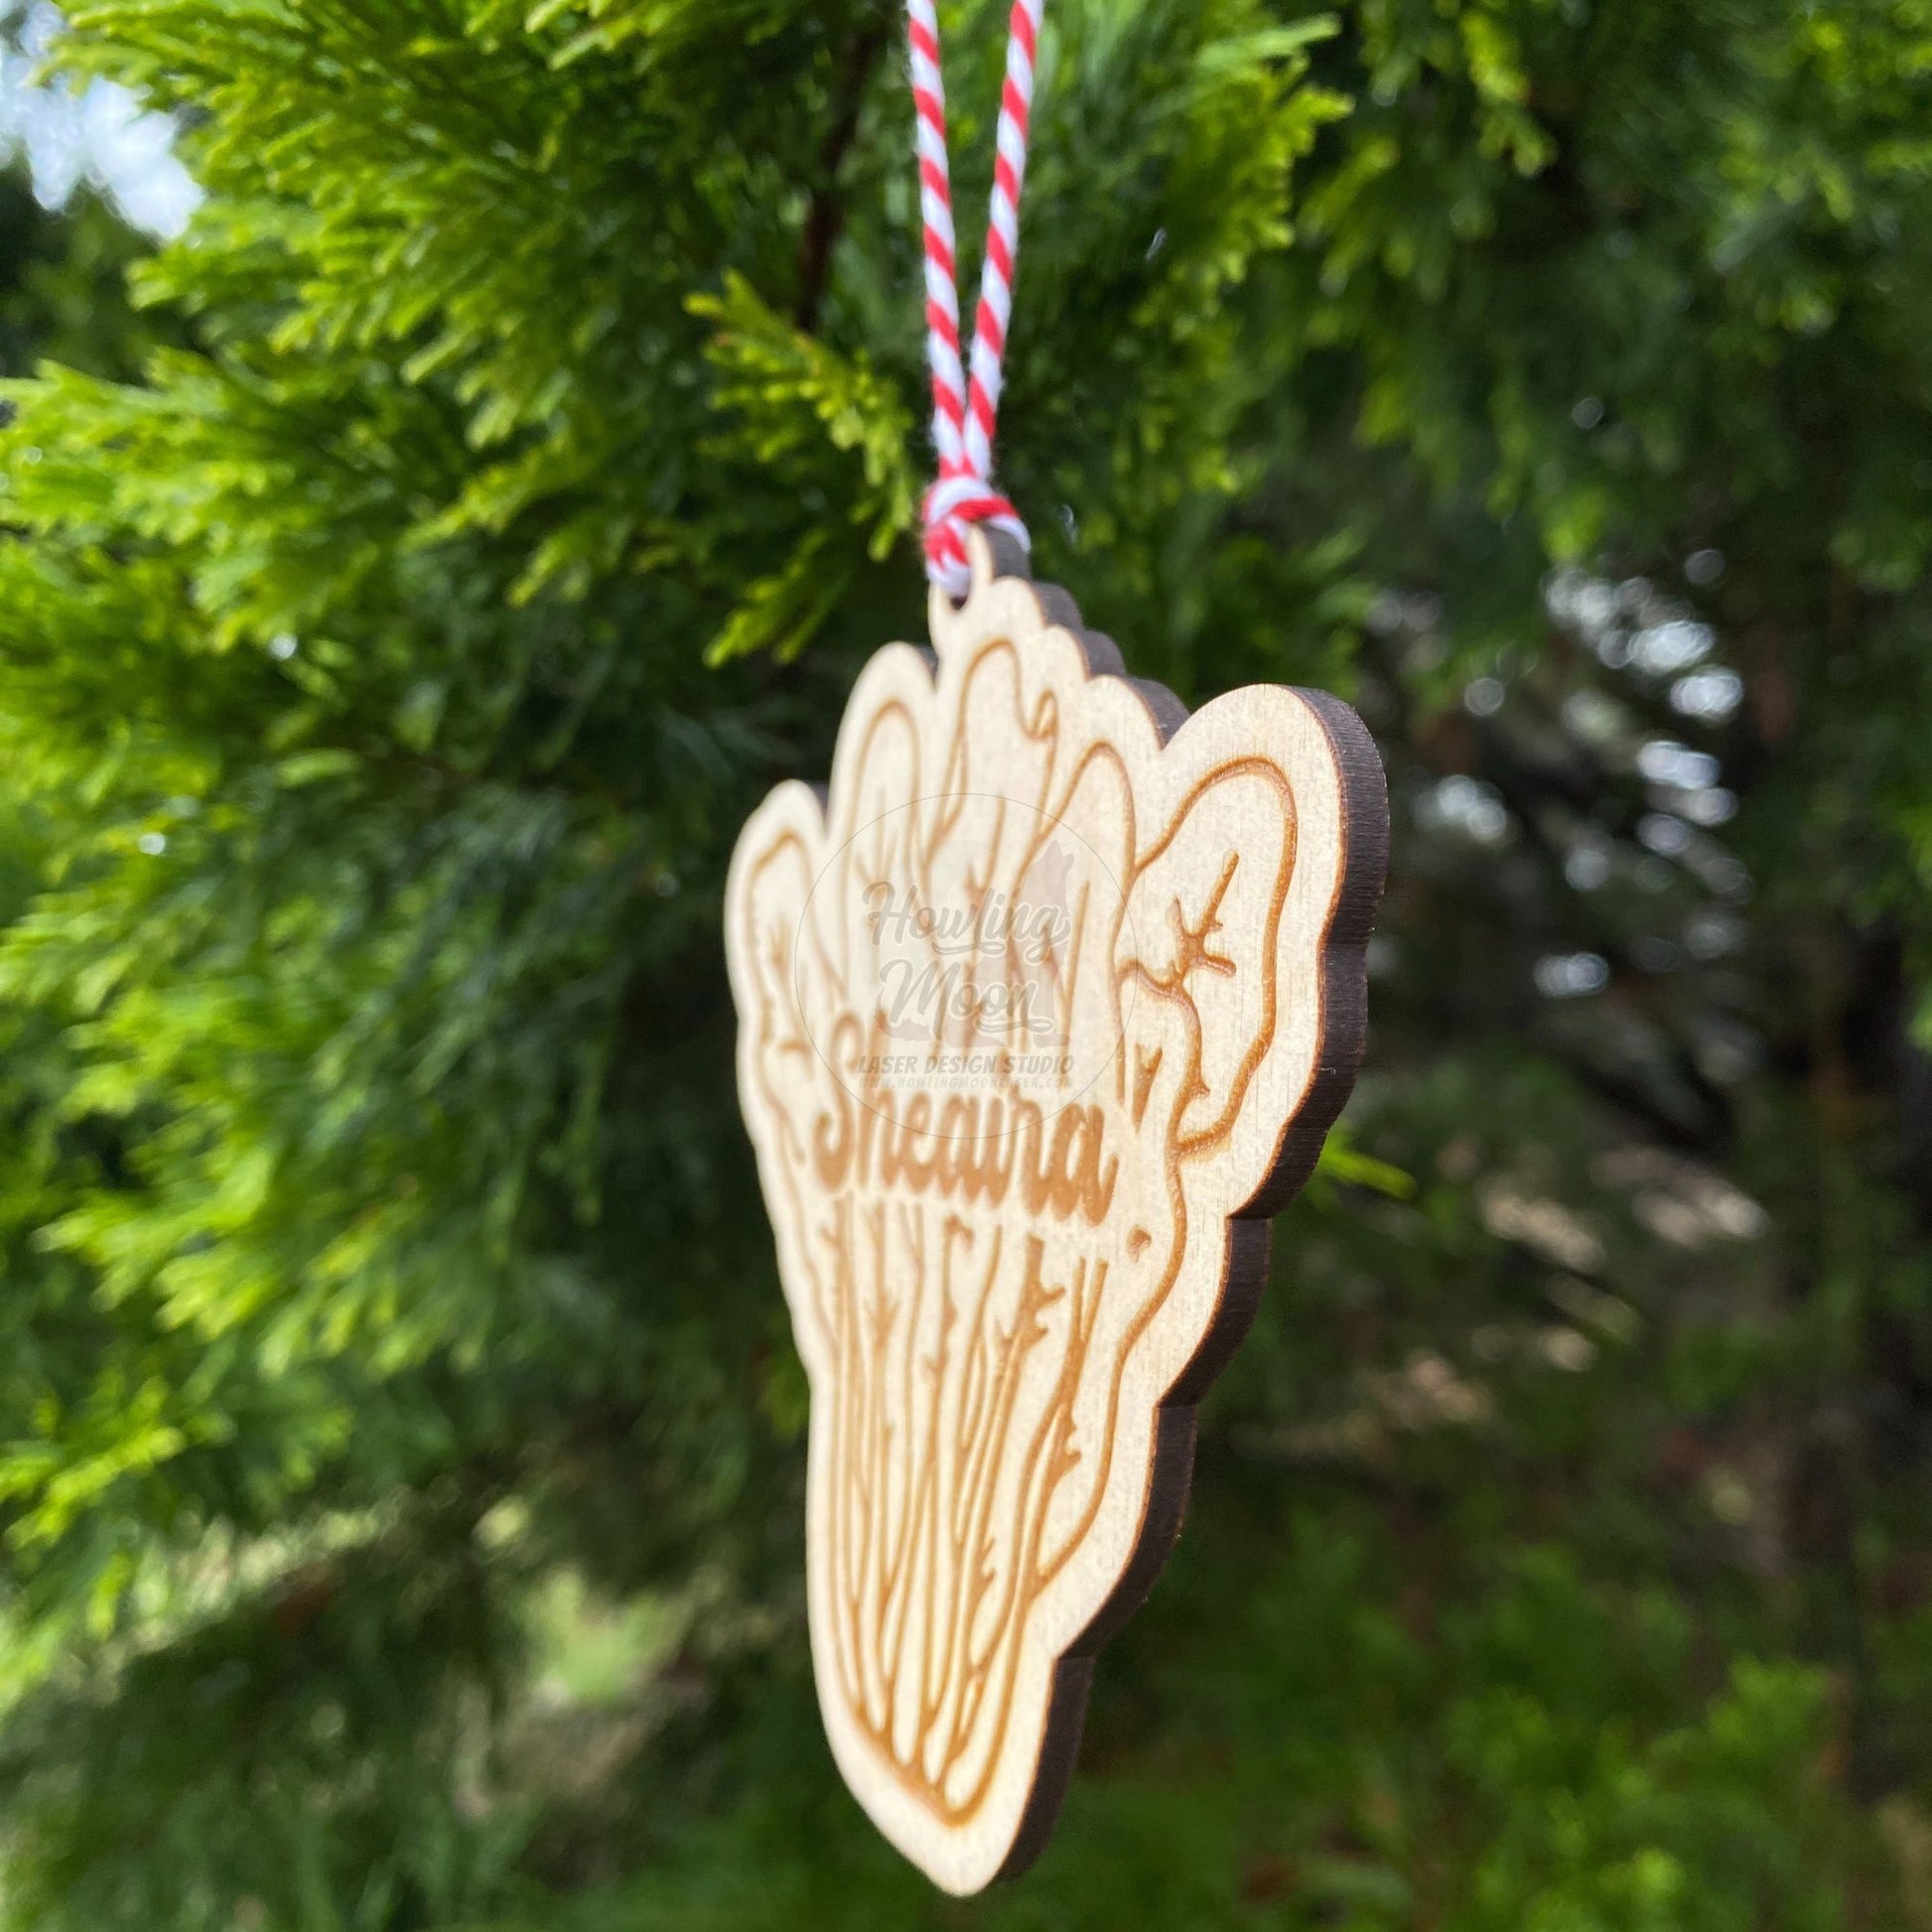 Side view of Personalized romaine lettuce ornament from Howling Moon Laser Design in Virginia, USA